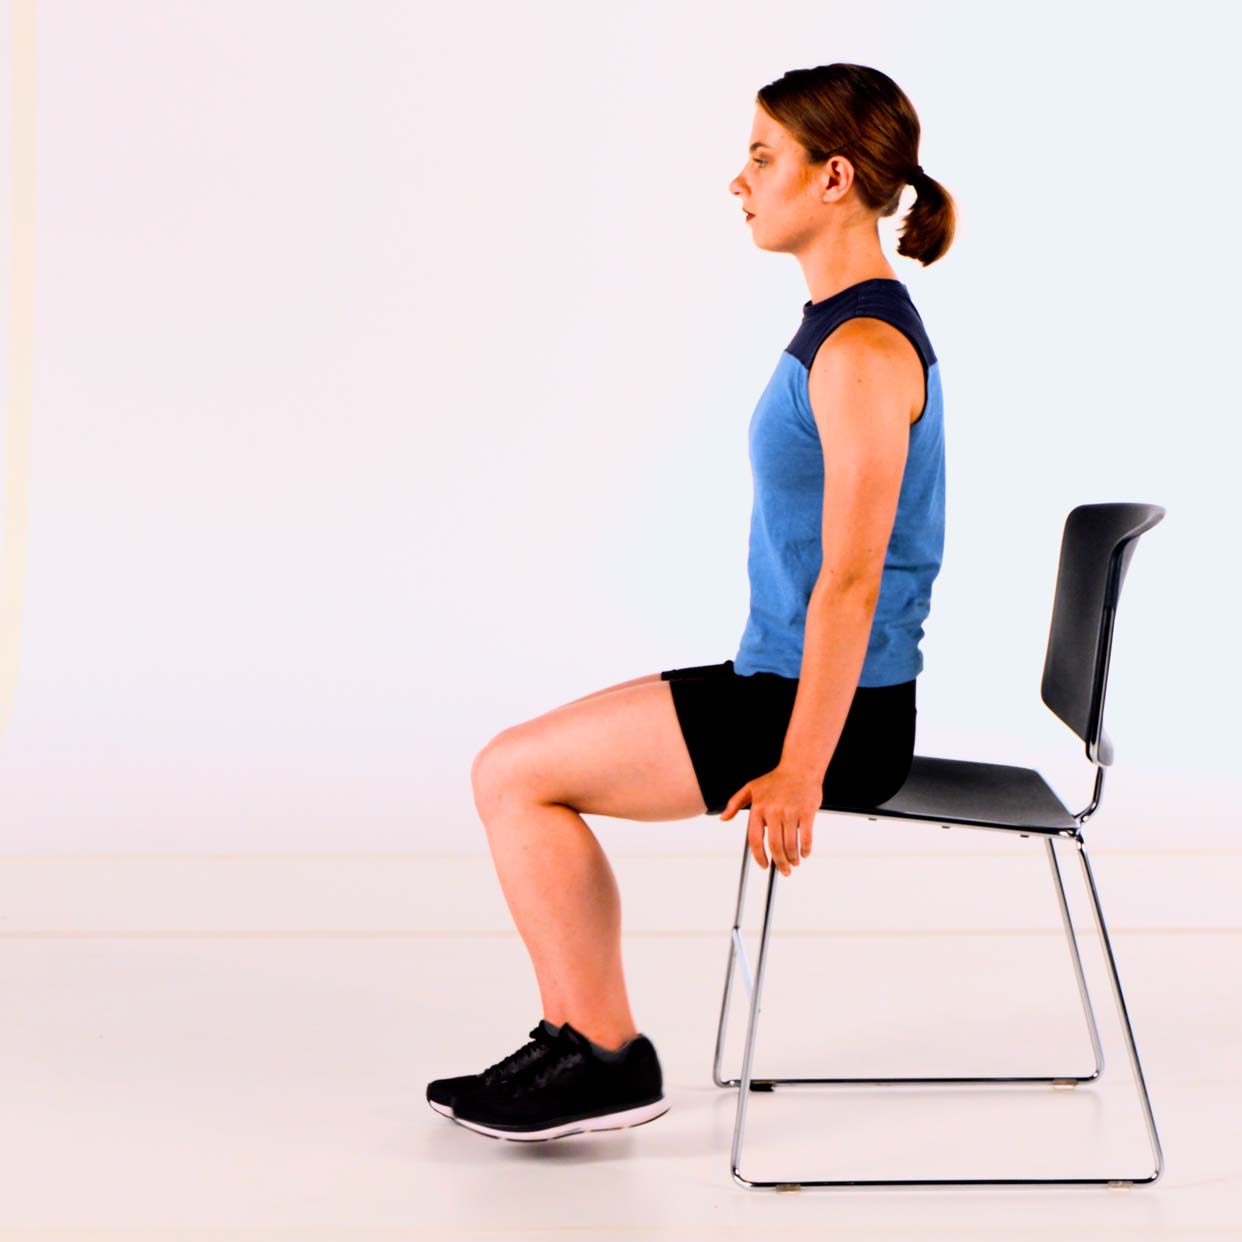 Seated Knee Flexion & Extension 1